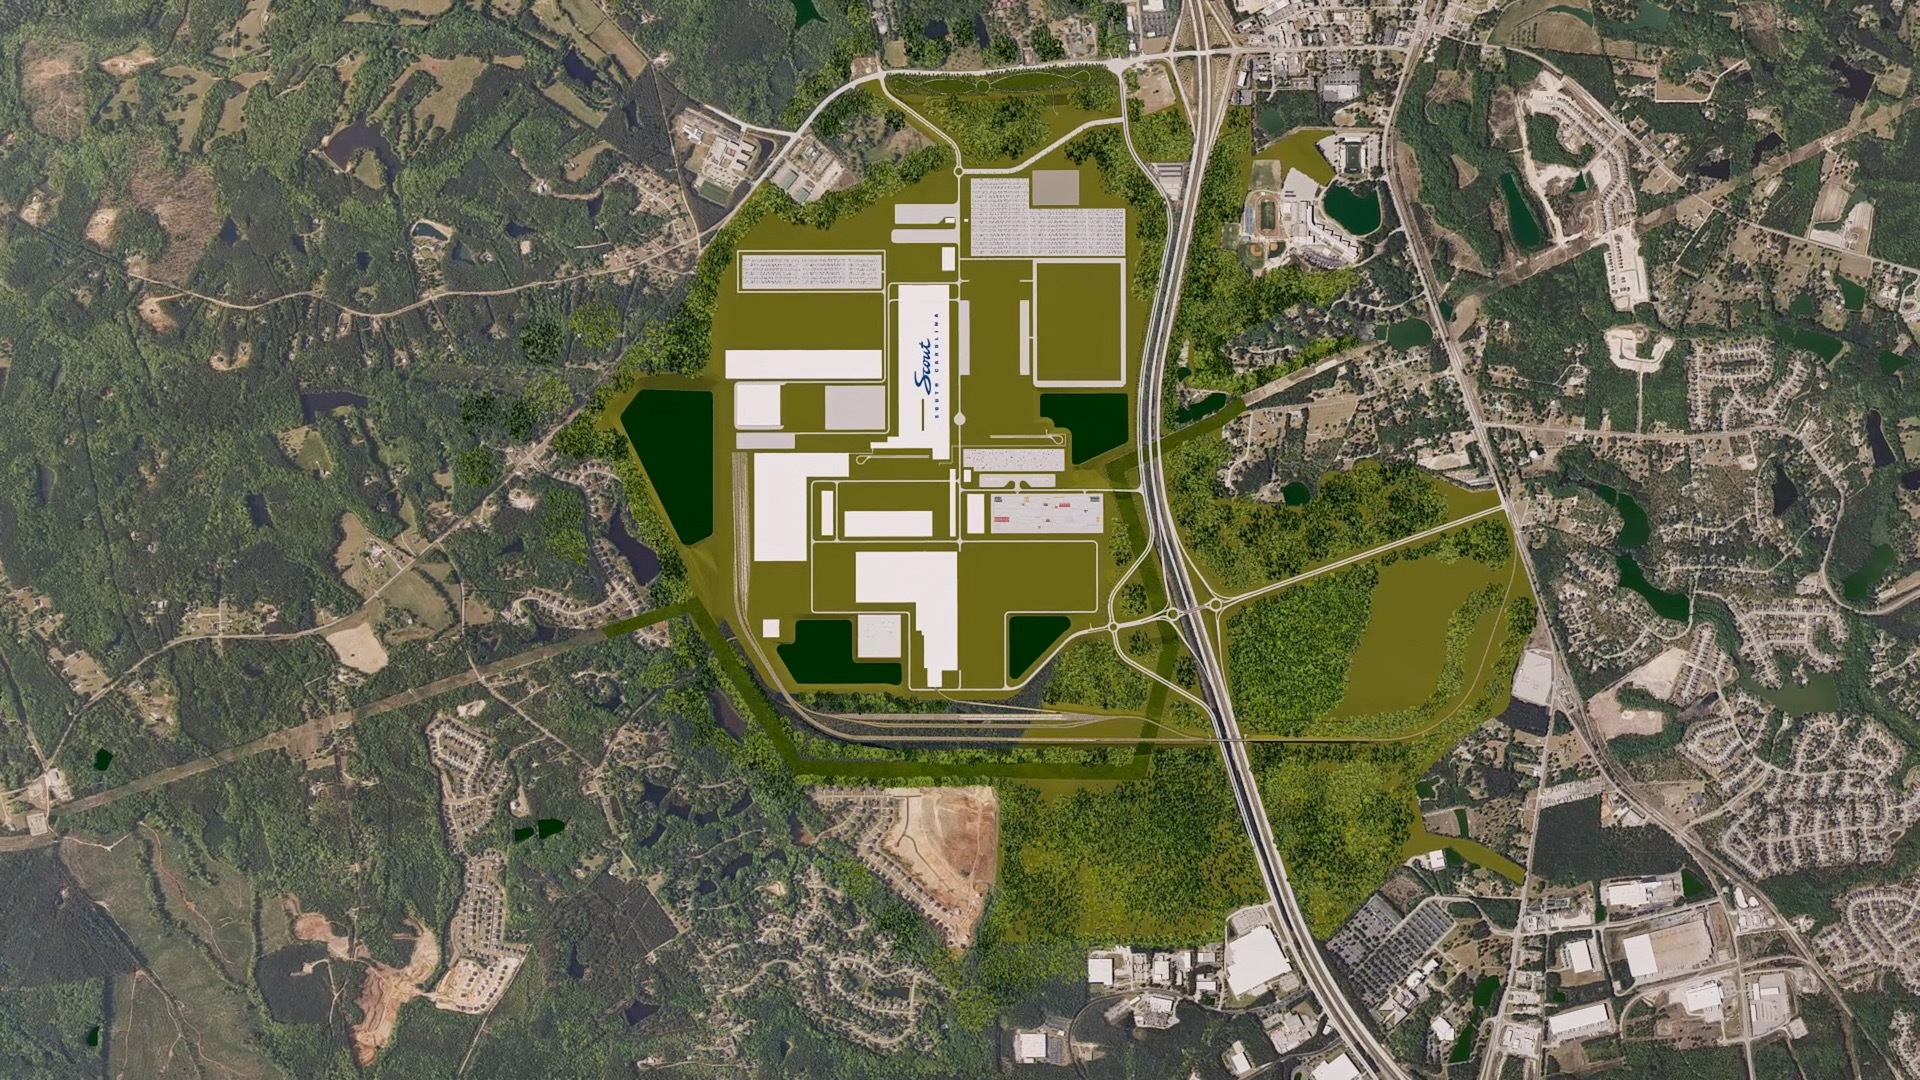 Rendering of proposed Scout Motors factory near Columbia, South Carolina